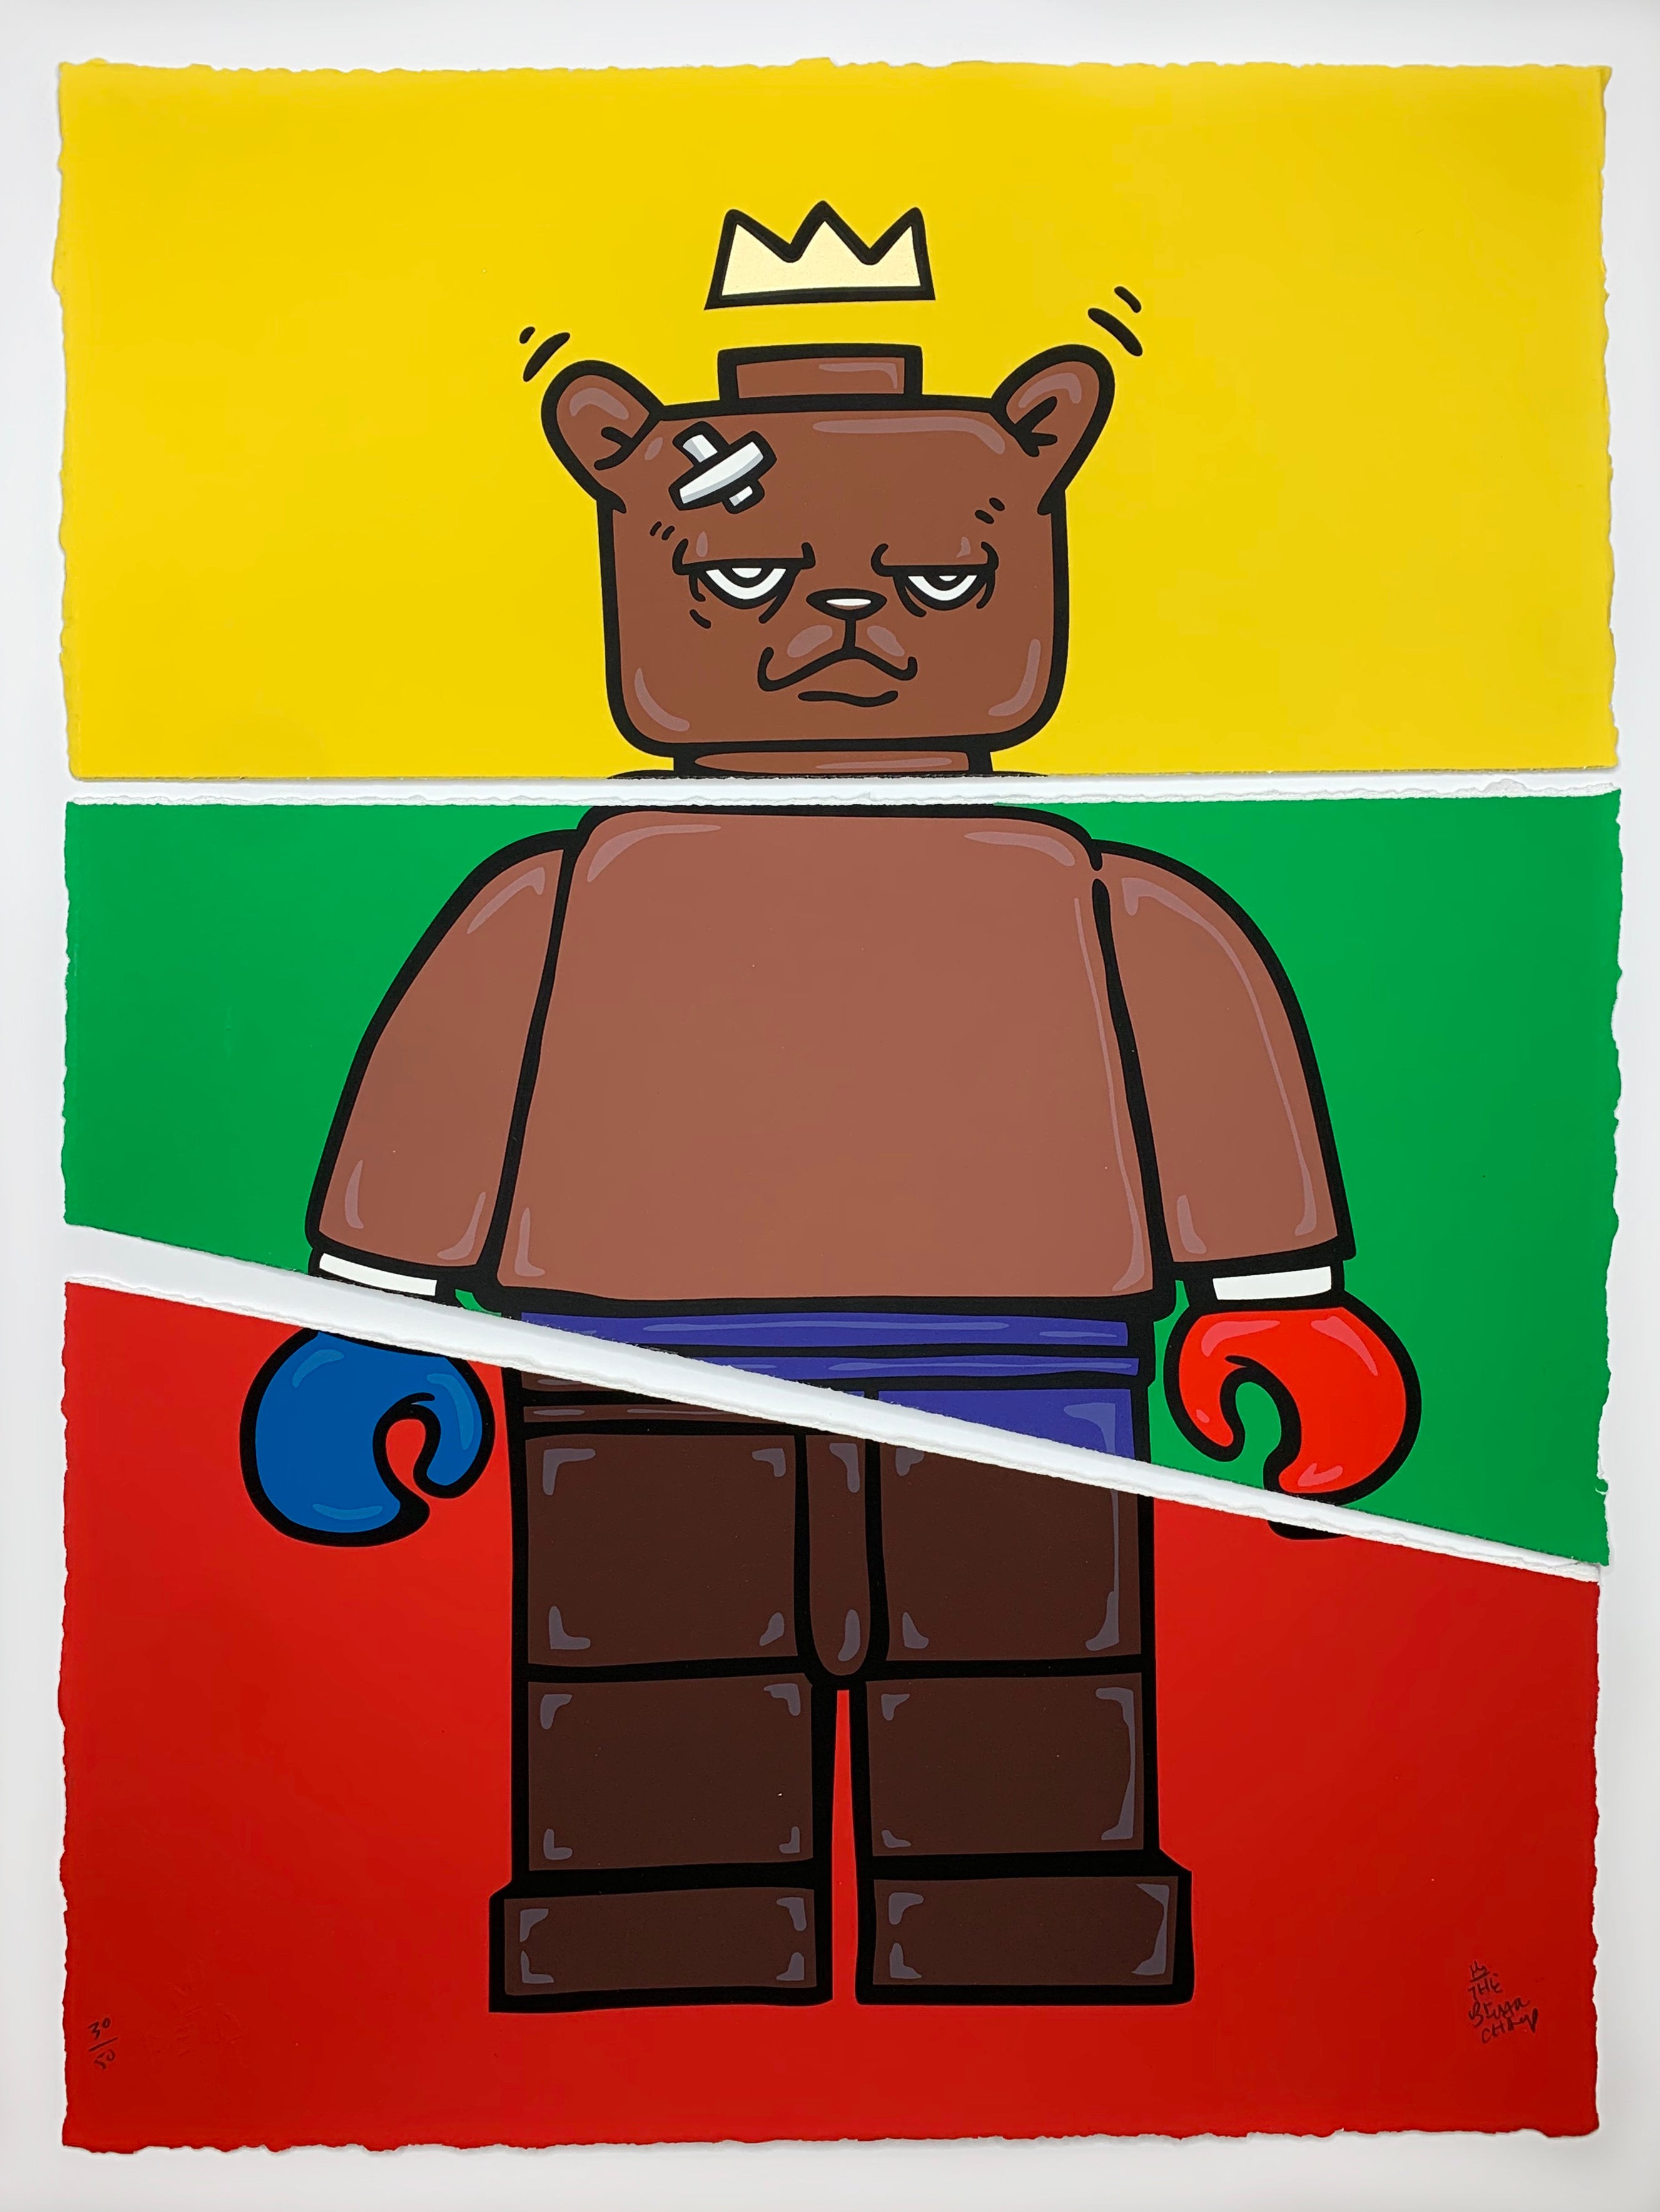 "Bear & Square Reimagined 2" by JC Rivera